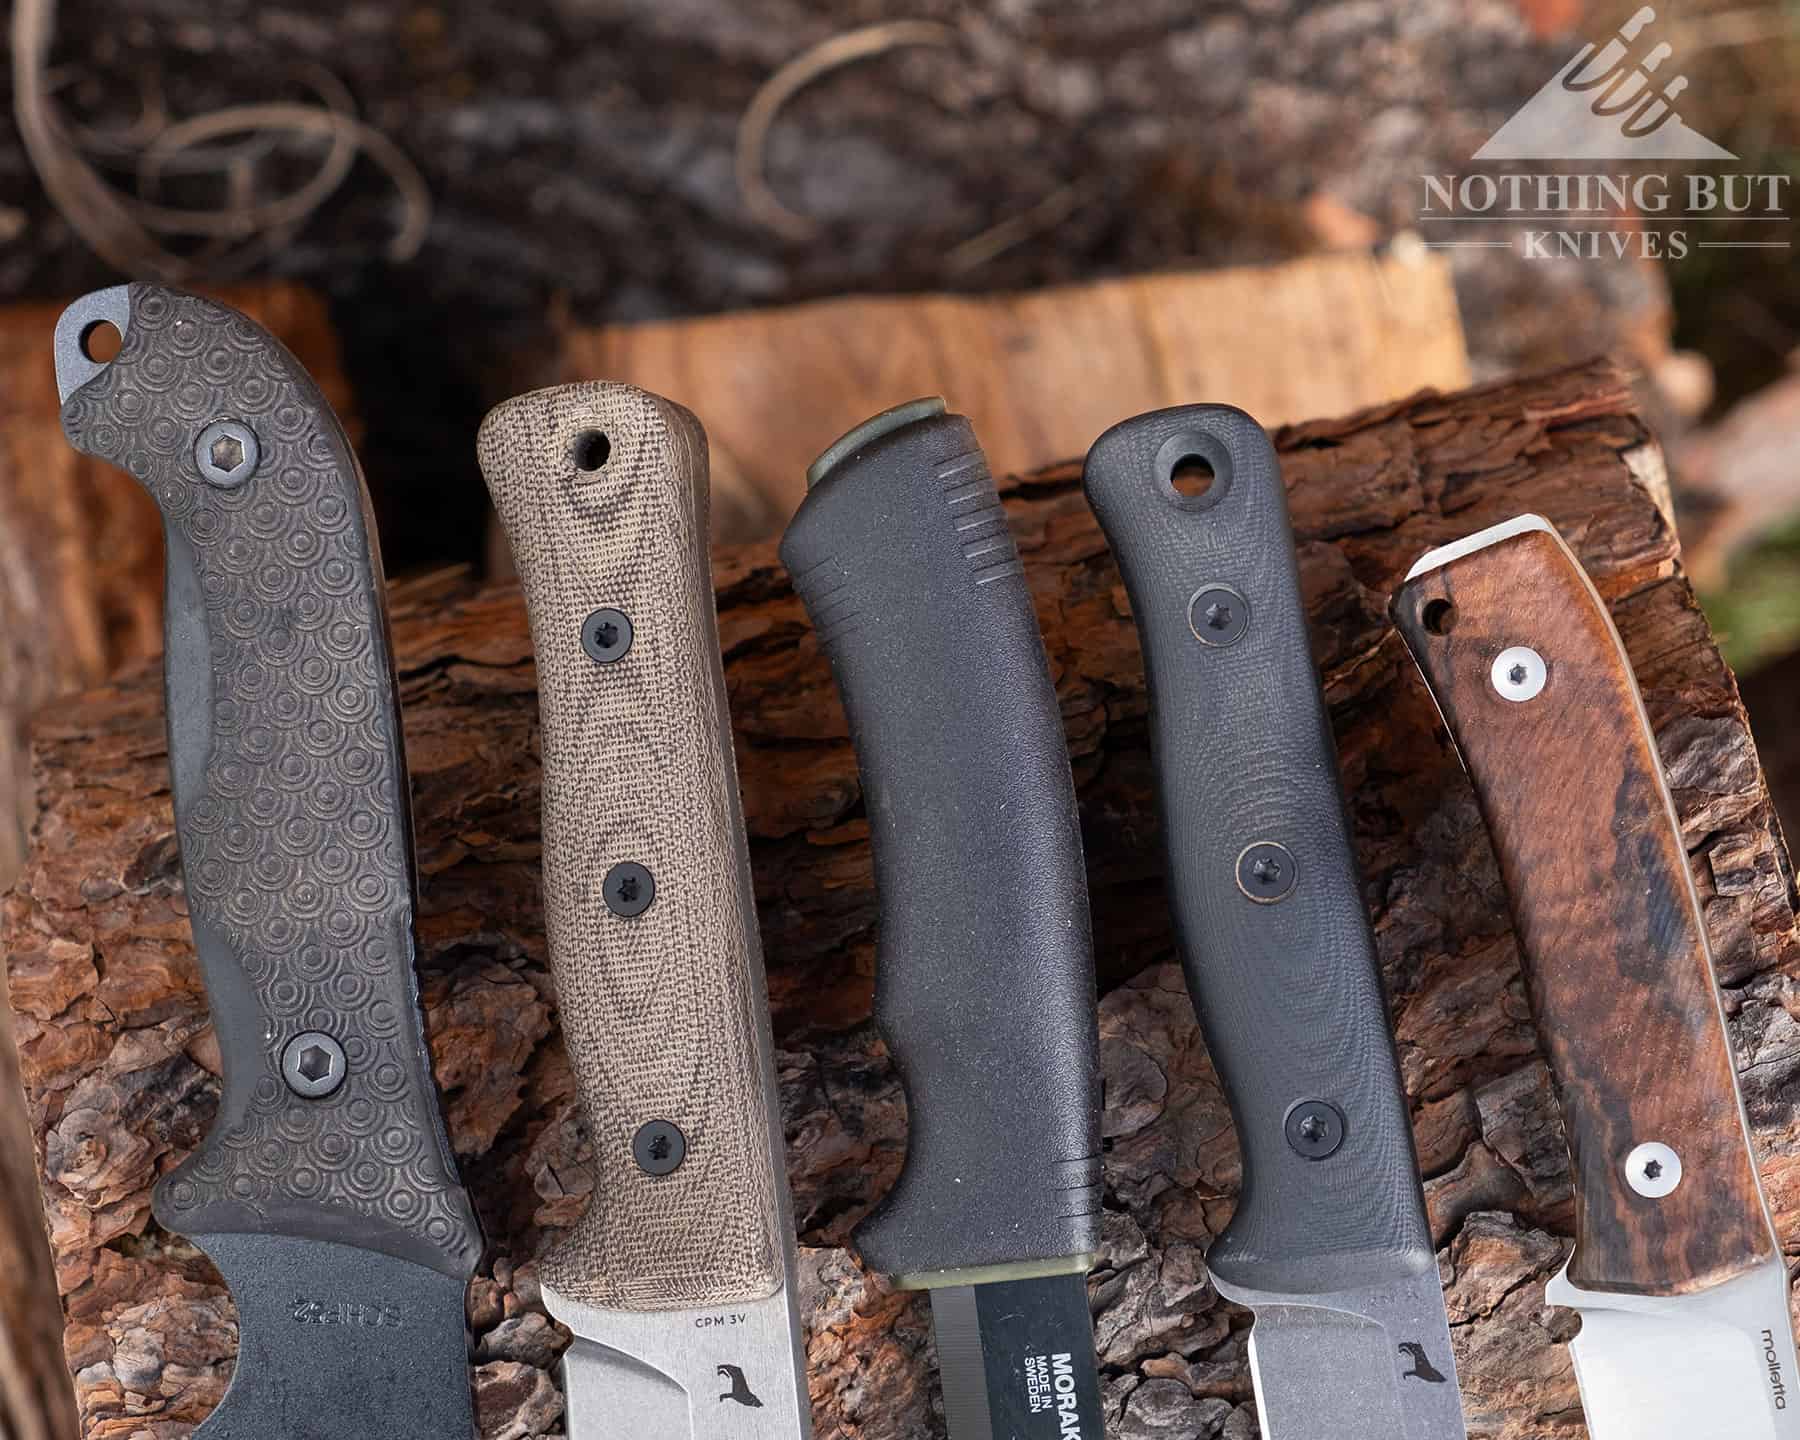 Handle material, shape and size are all important aspects of minding a bushcraft knife that best fit your needs.